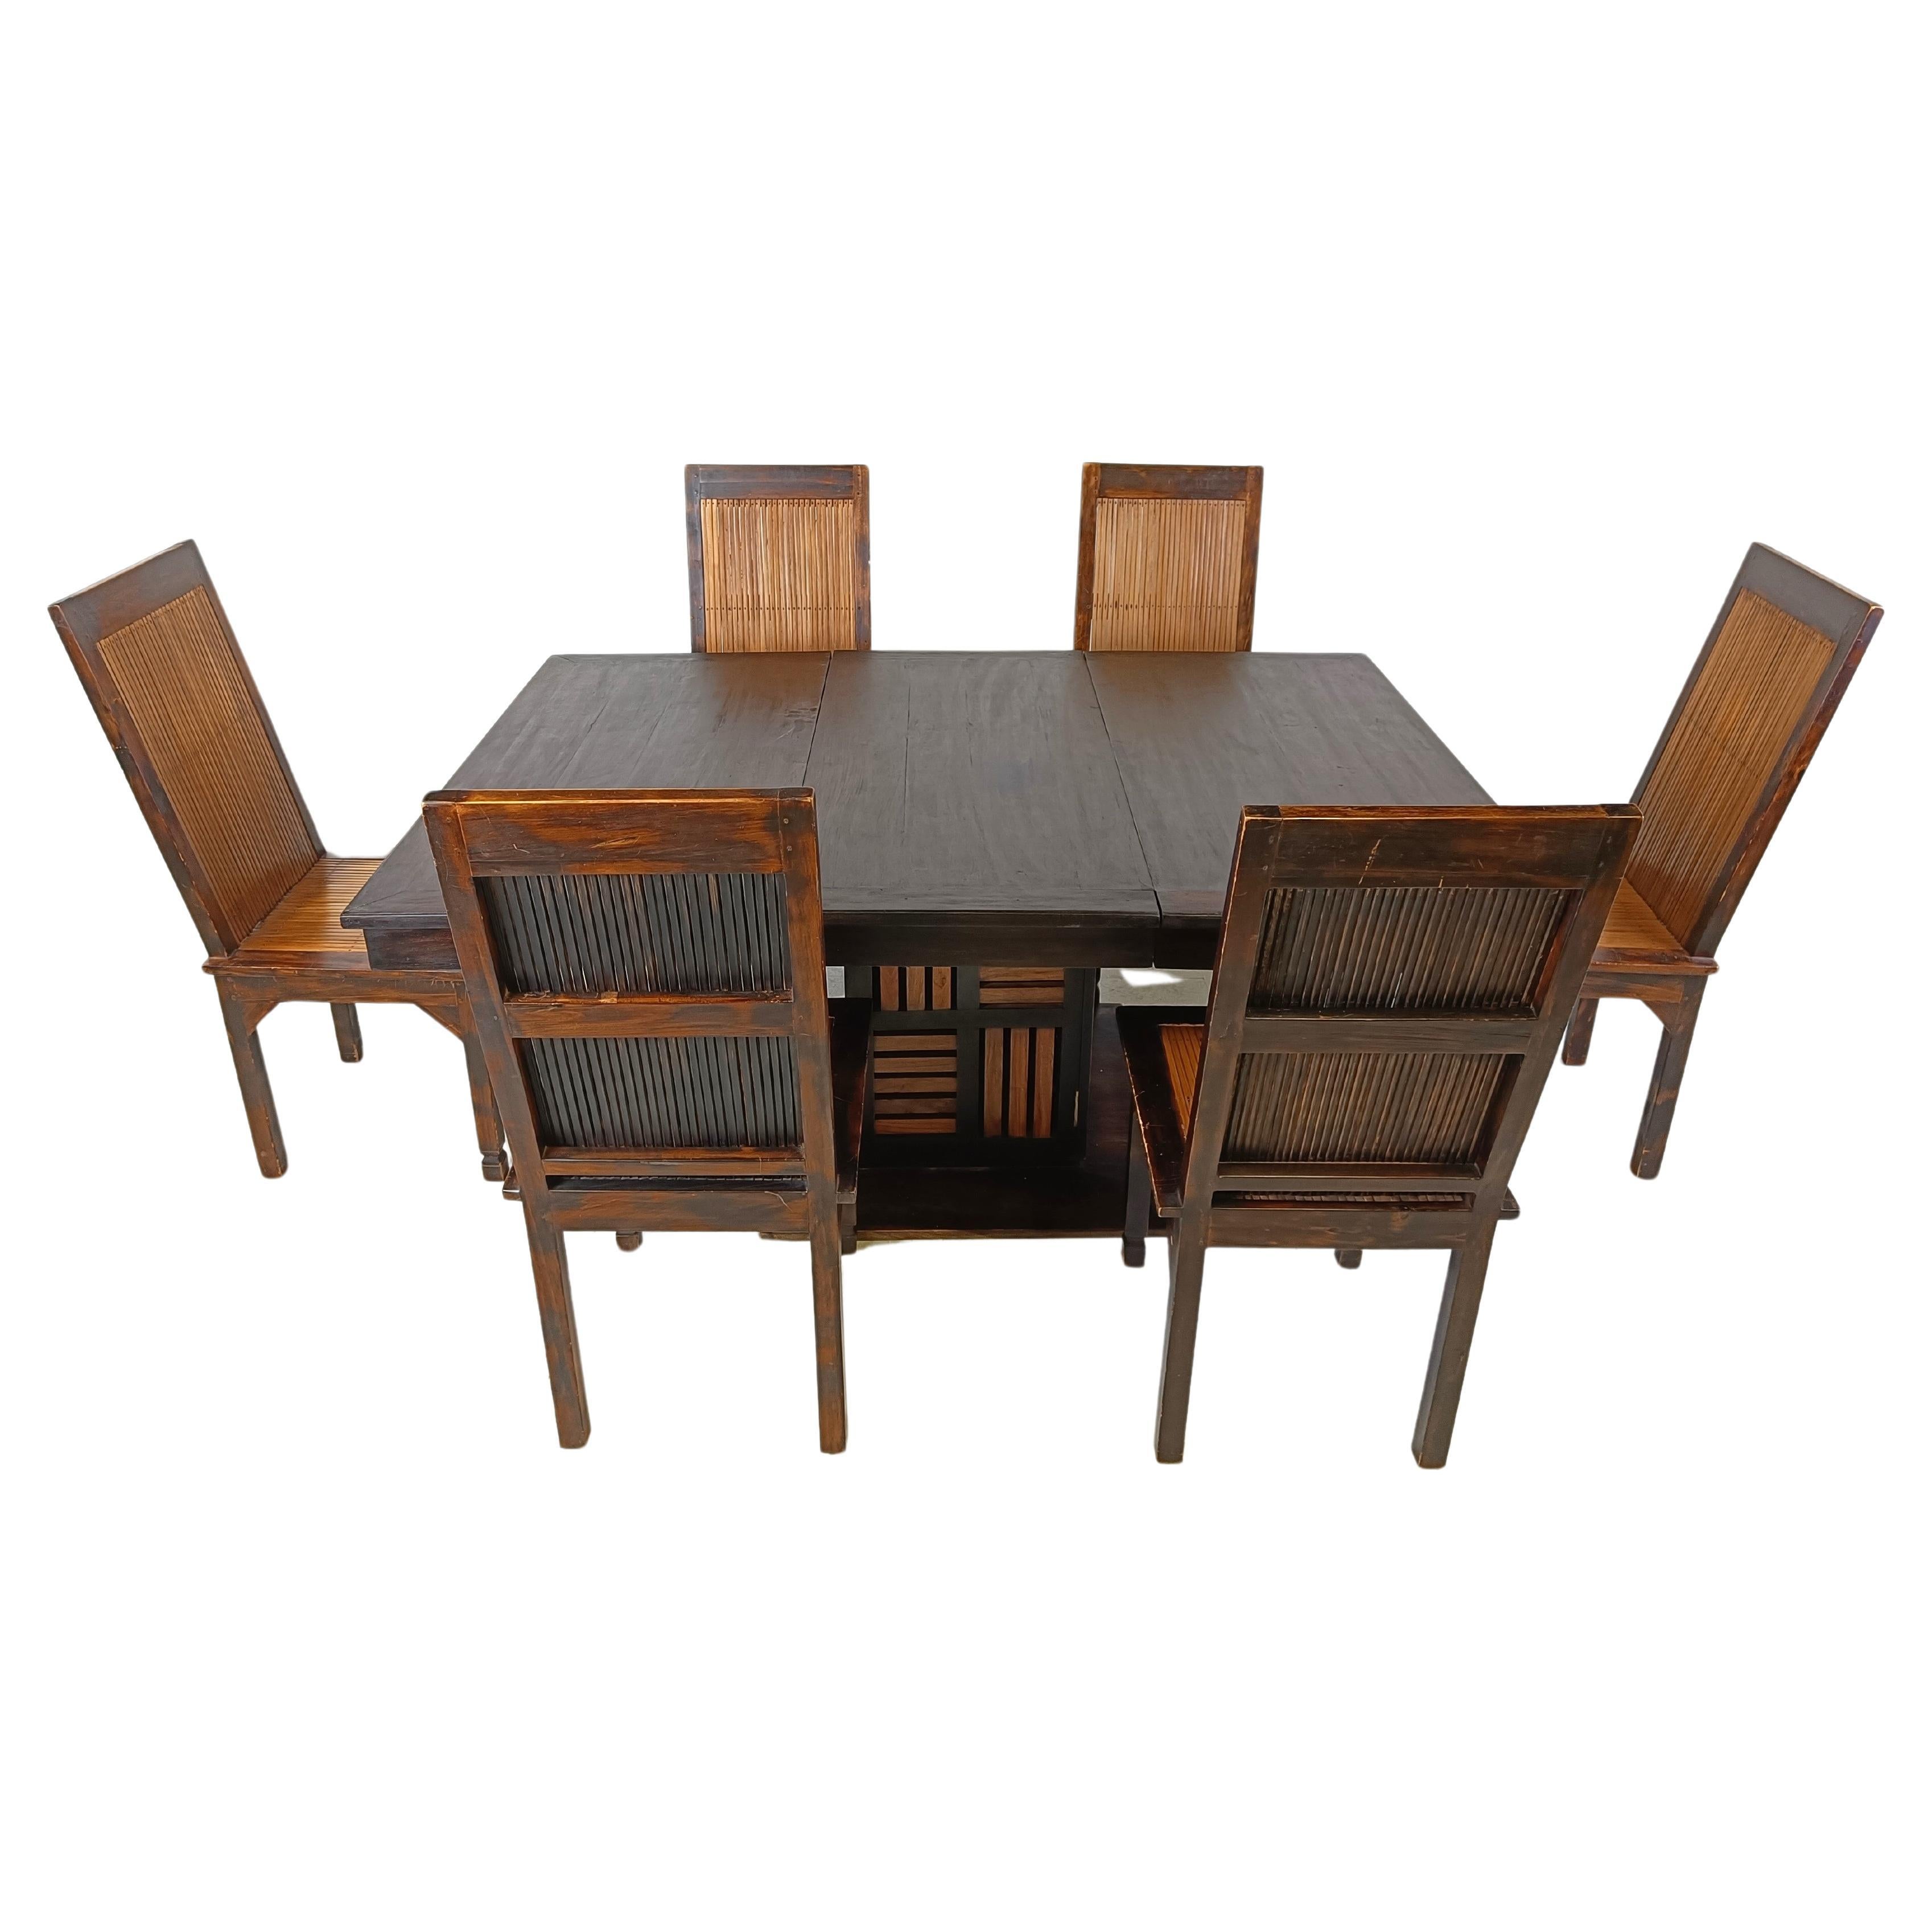 Balinese Dining Room Sets